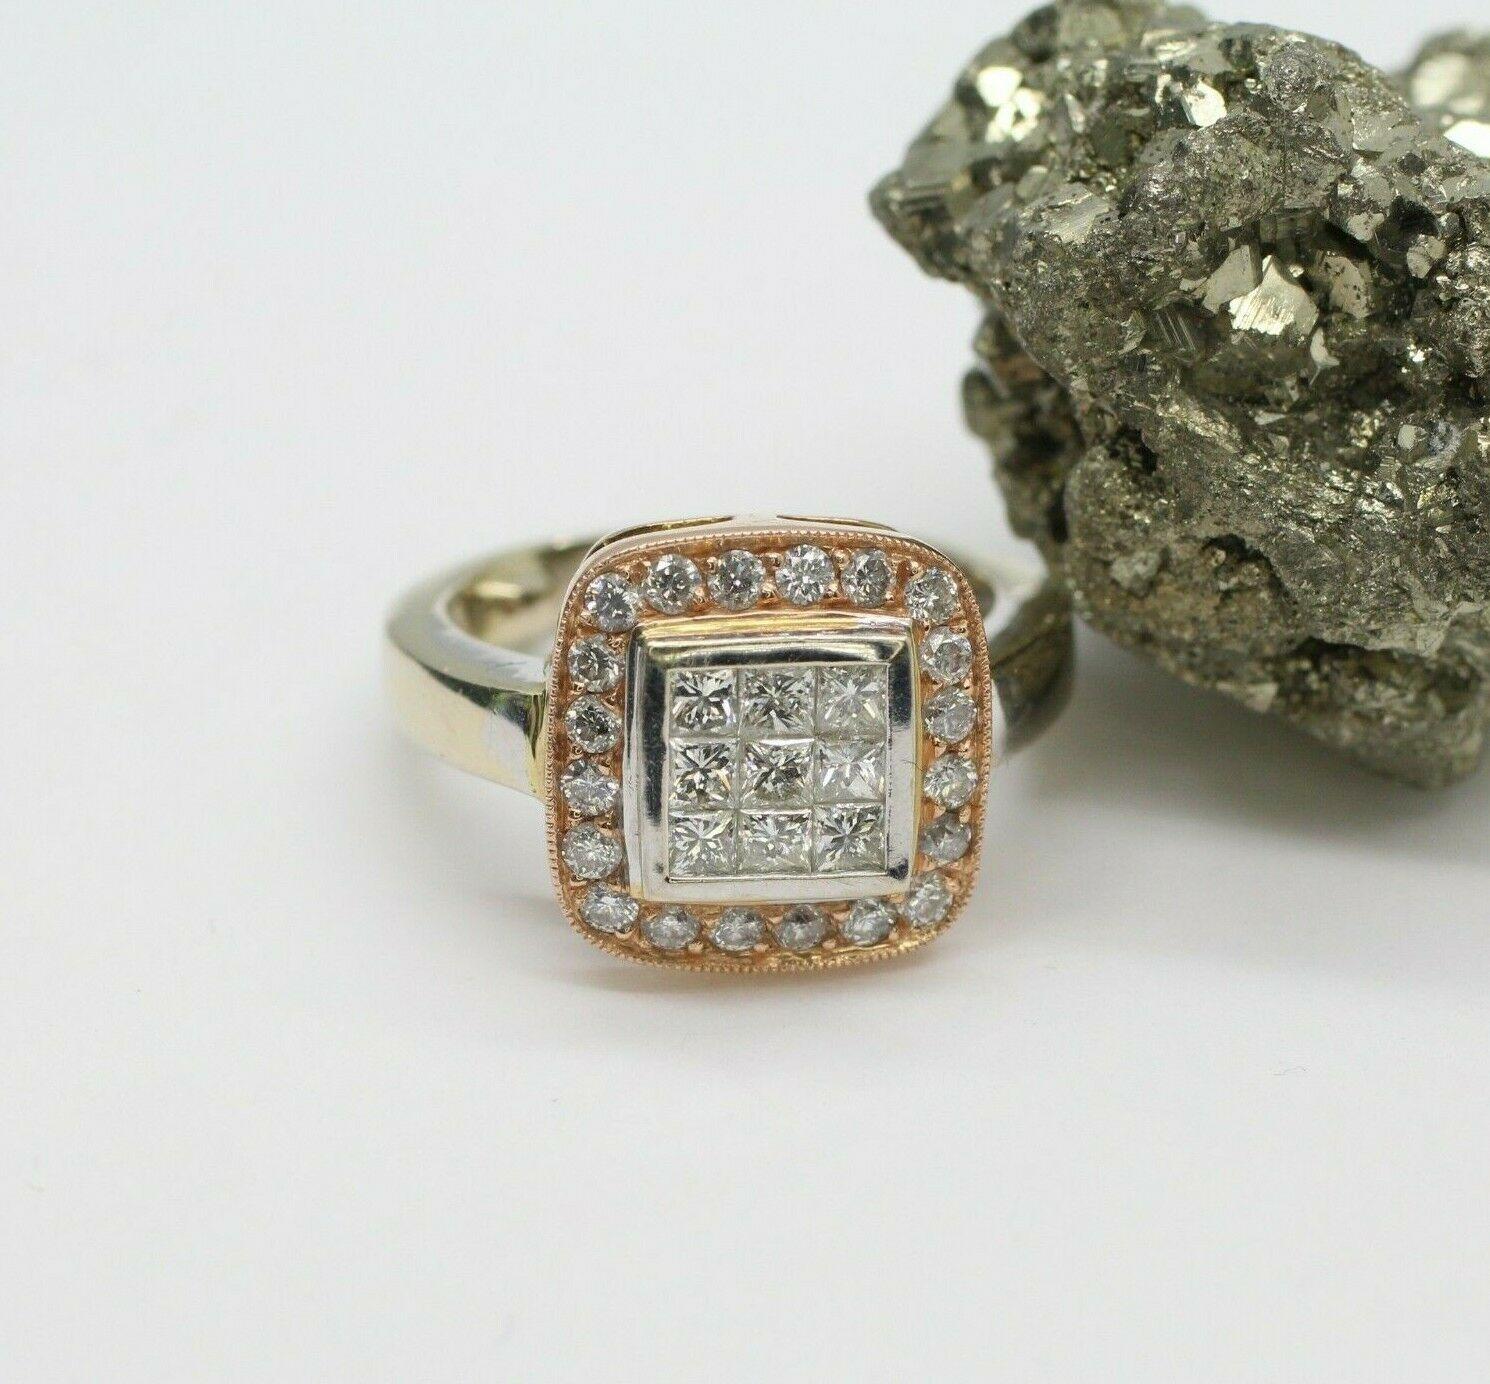 This is a 14k white gold ring with invisible set princess diamonds surrounded with white round diamonds. The diamonds are tightly set close together to form a diamond invisible set. It weighs 7.2 grams of two tone rose and white  gold and diamonds.